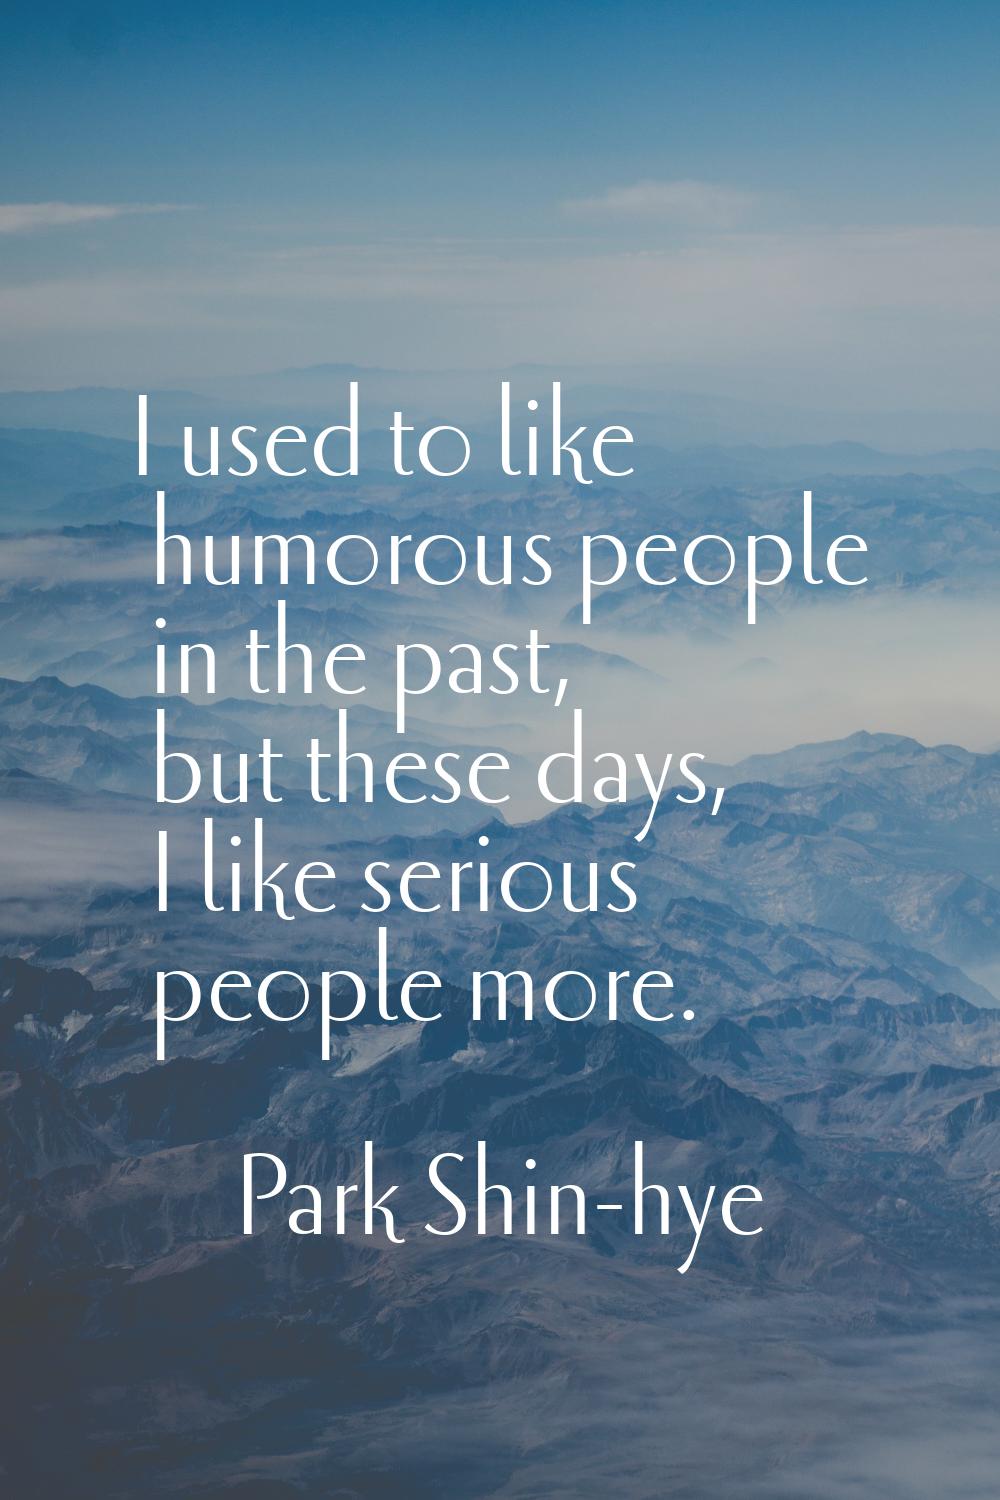 I used to like humorous people in the past, but these days, I like serious people more.